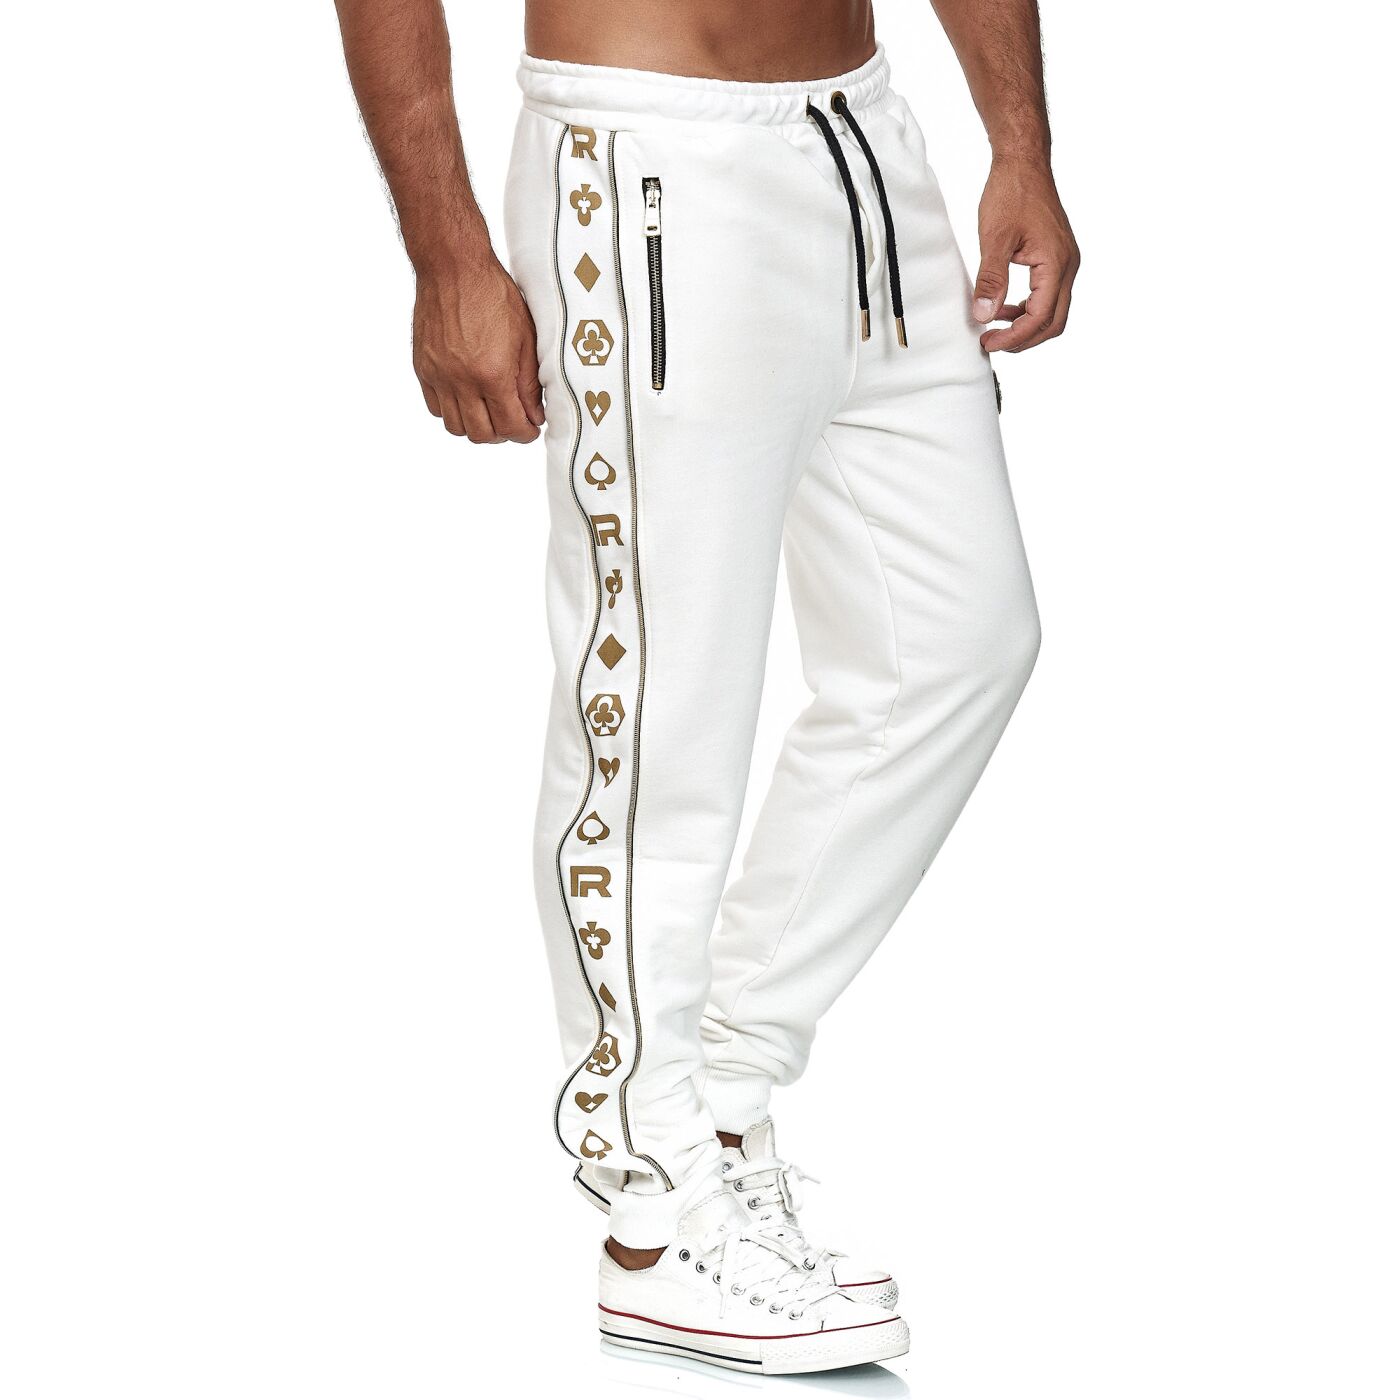 GlacialWhale Men Wide Leg Pants Casual Light Weight Joggers